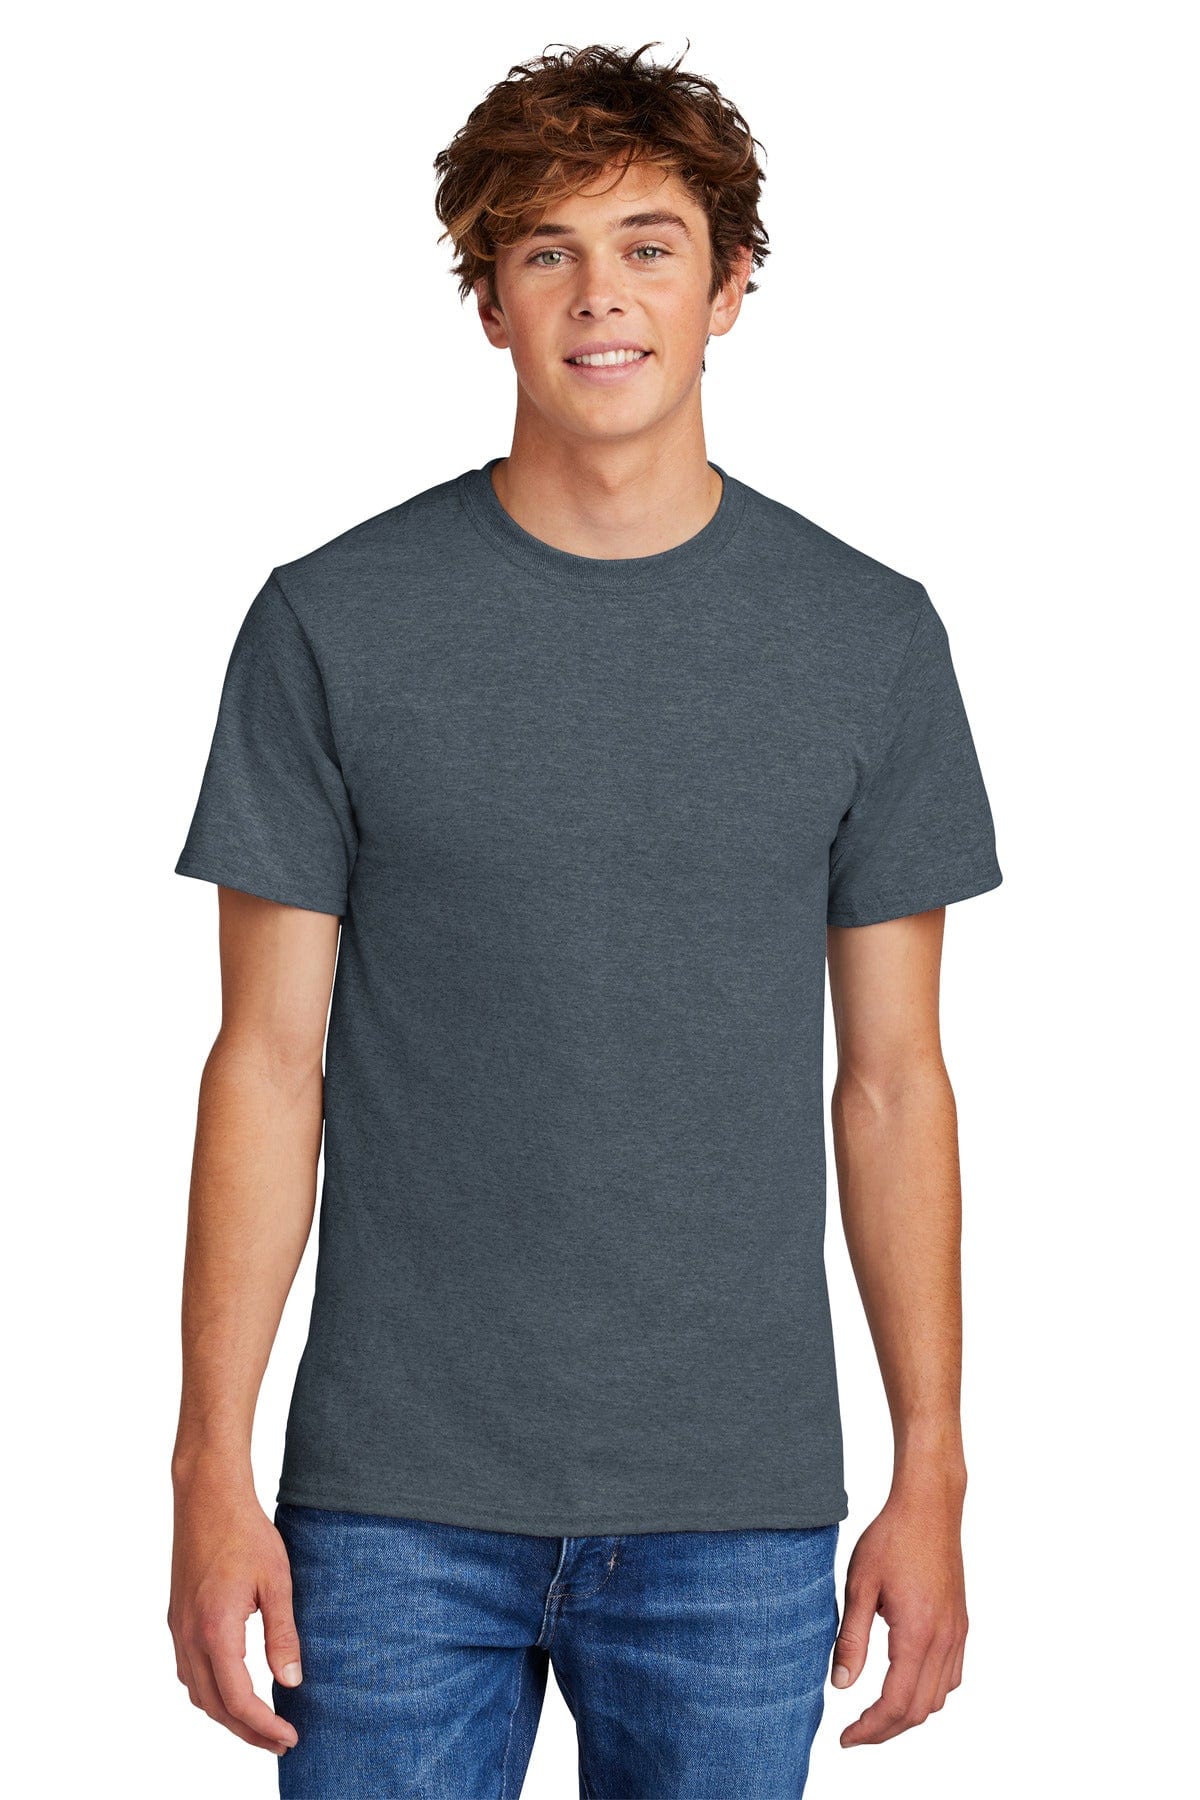 Port & Company ®  - Core Blend Tee.  PC55, Extended Colors